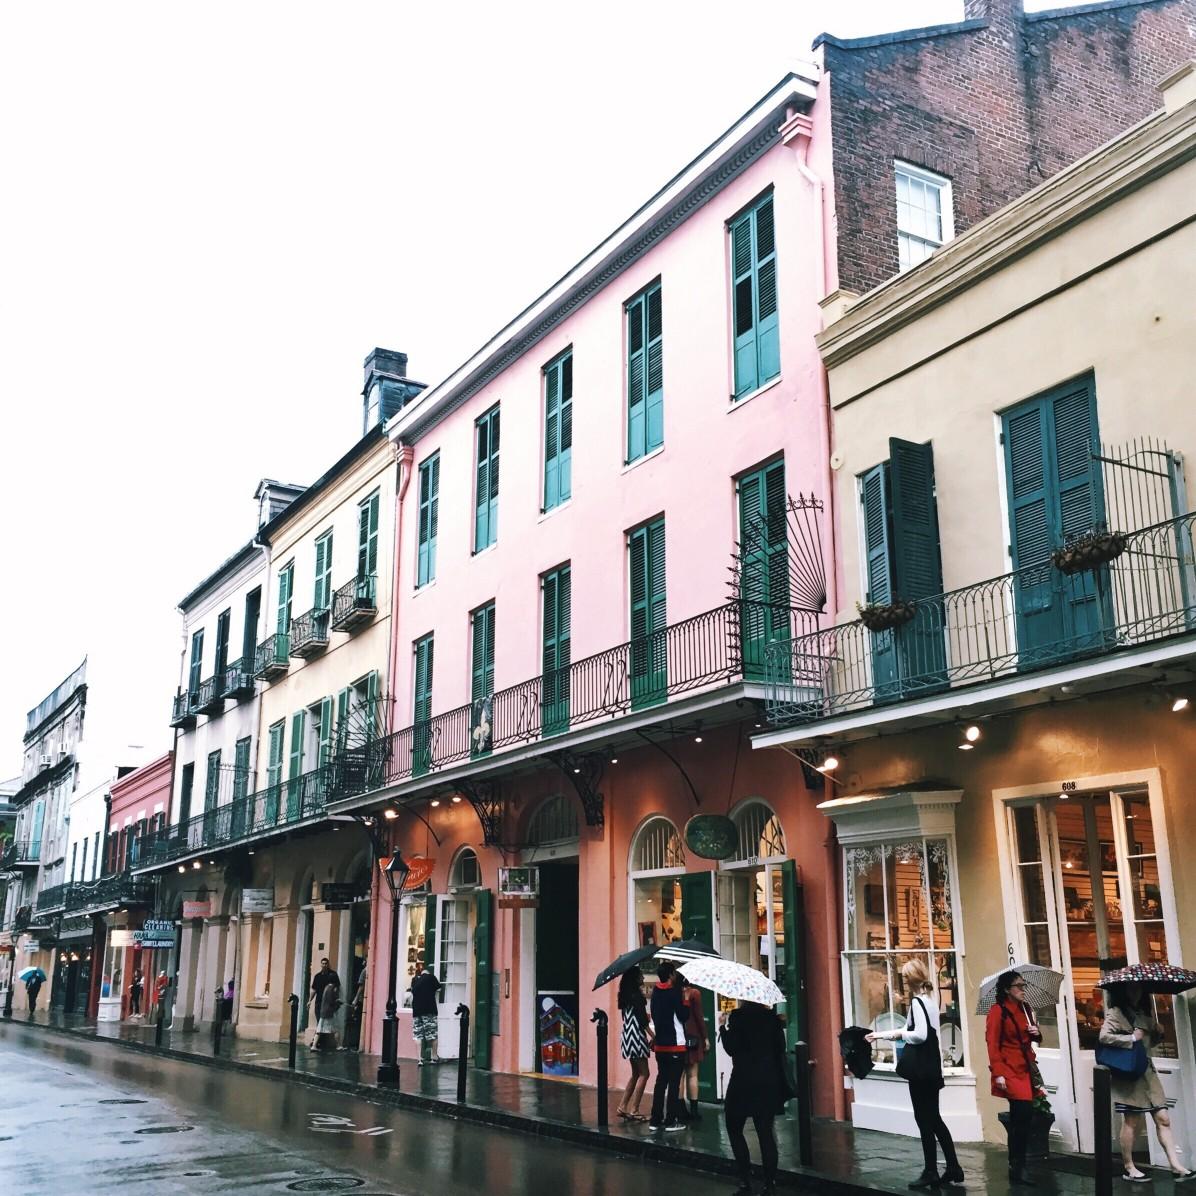 New Orleans French Quarter in the rain